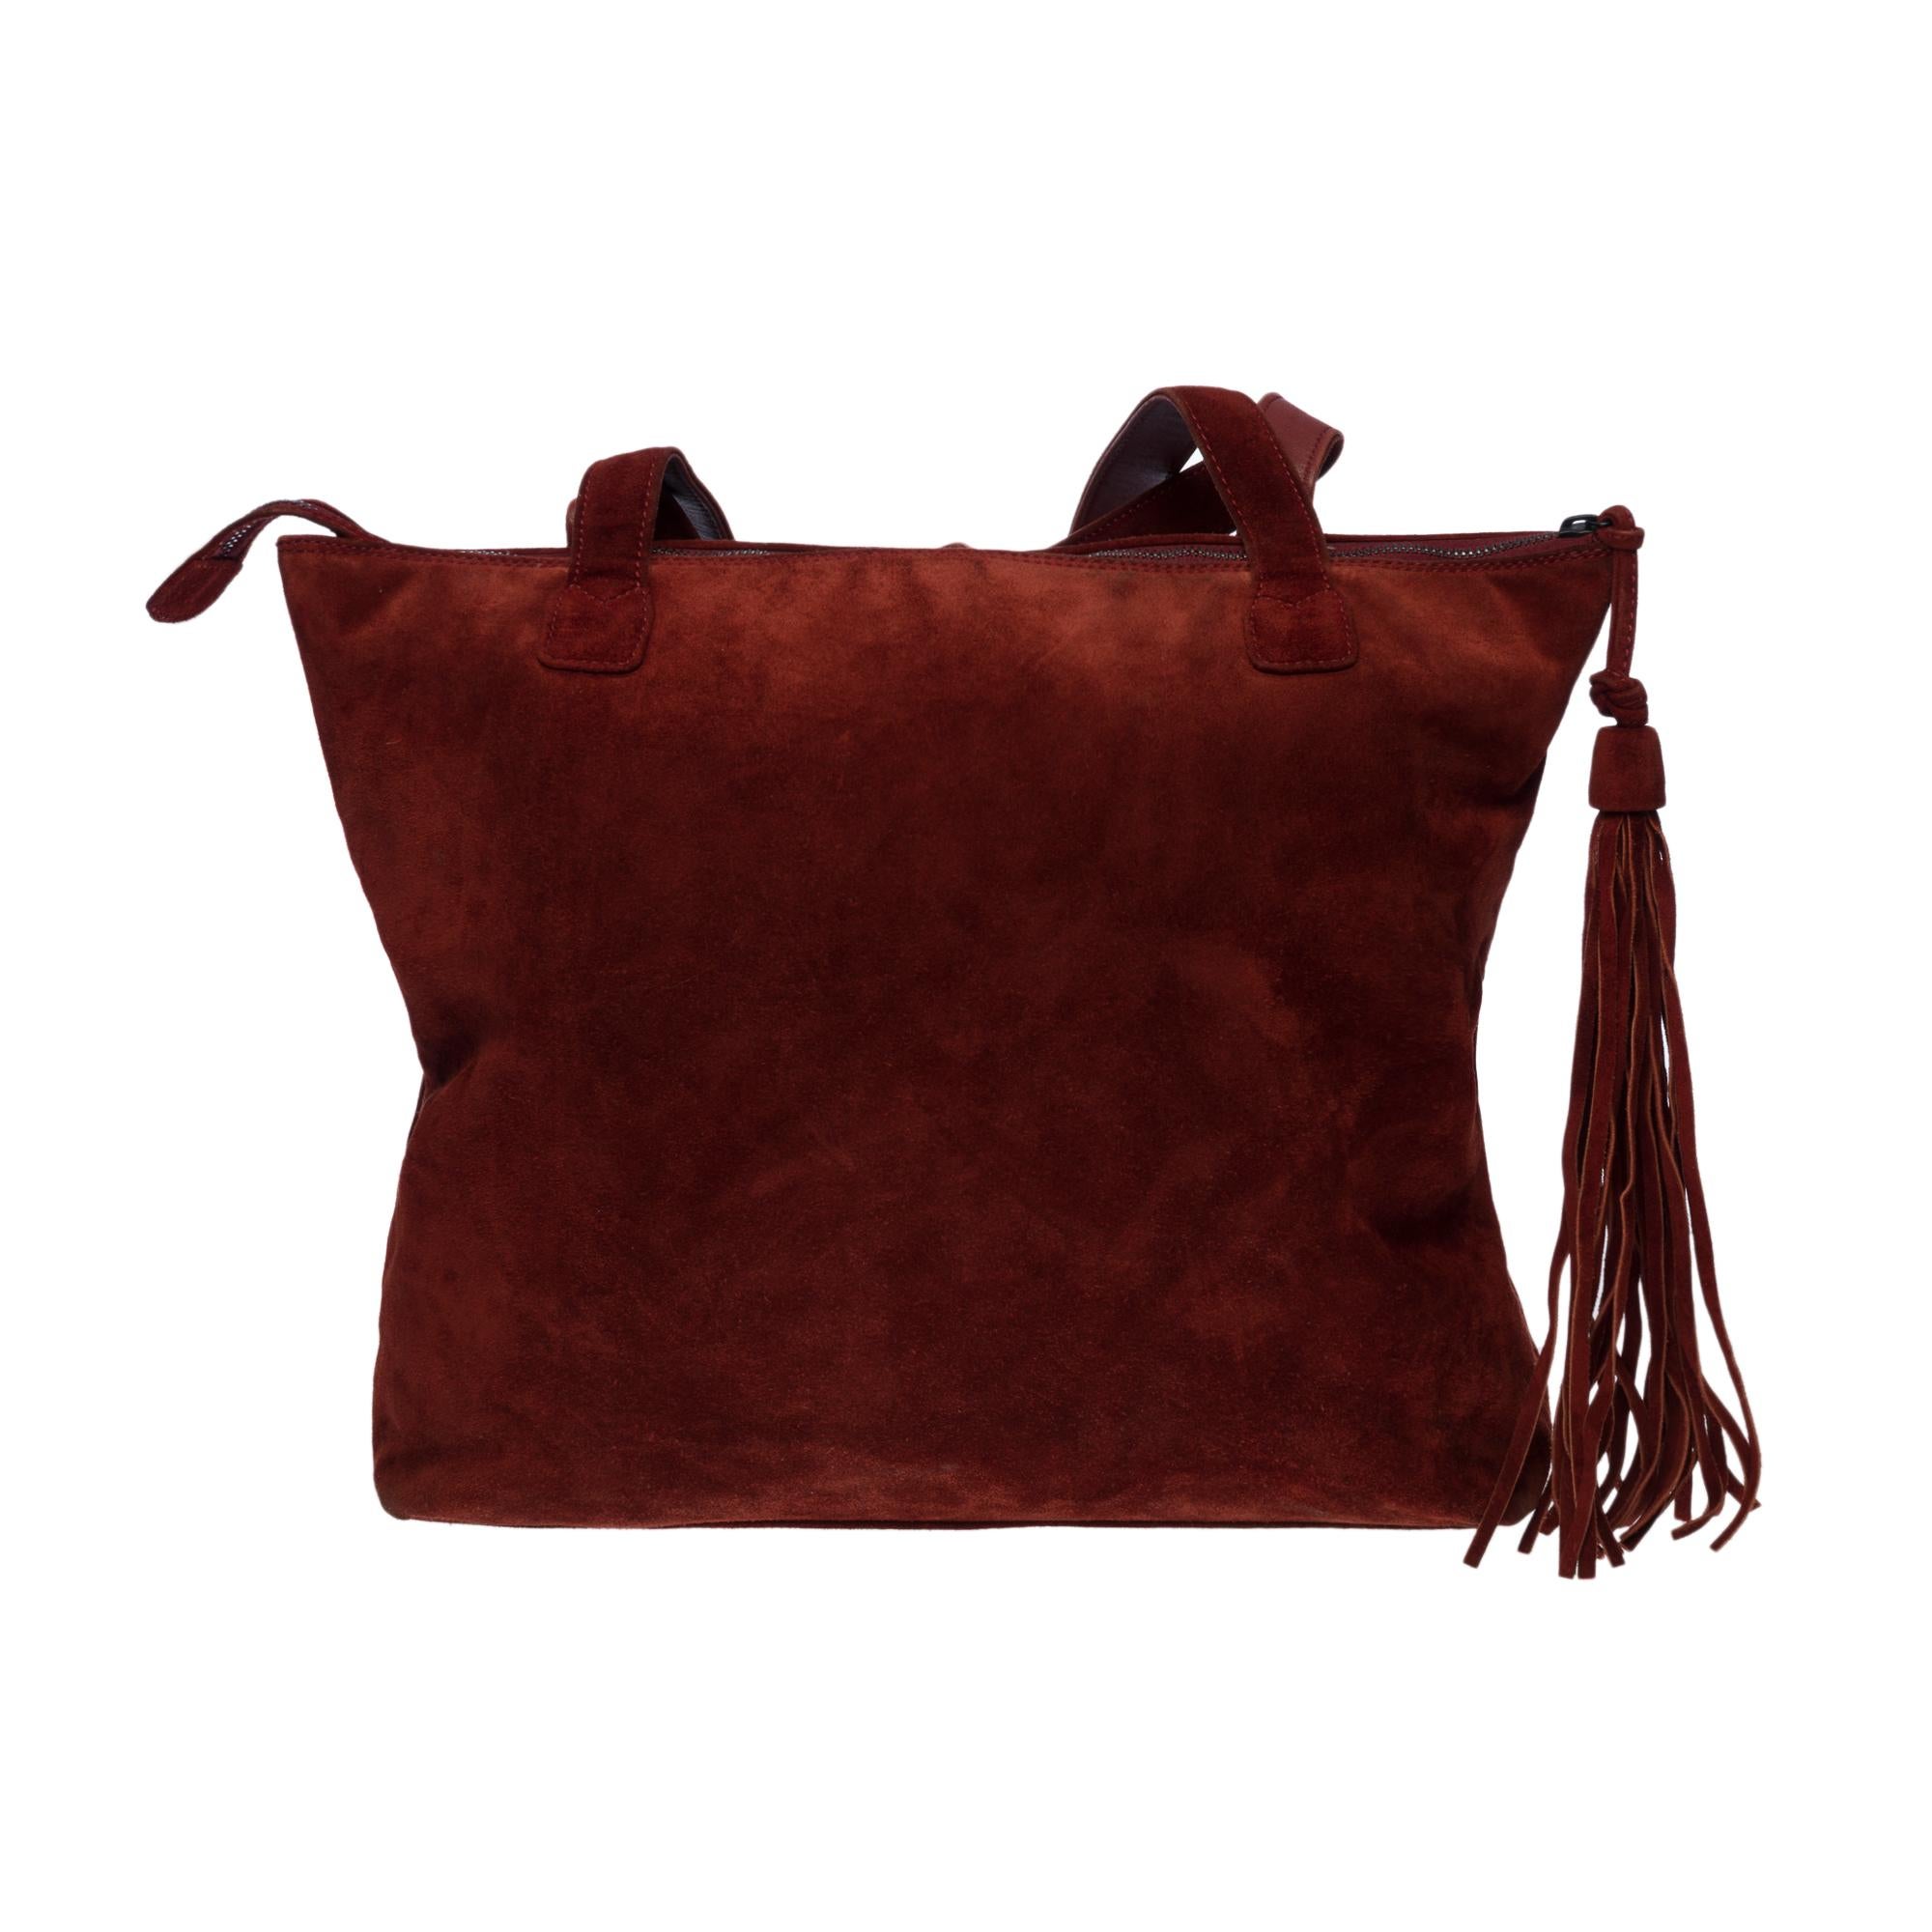 Very beautiful Chanel Tote bag in burgundy suede, ruthenium metal hardware, two bi-material handles in leather and burgundy suede allowing a hand and shoulder support
Zipper closure adorned with a burgundy suede fringe pom pom
Black fabric lining,